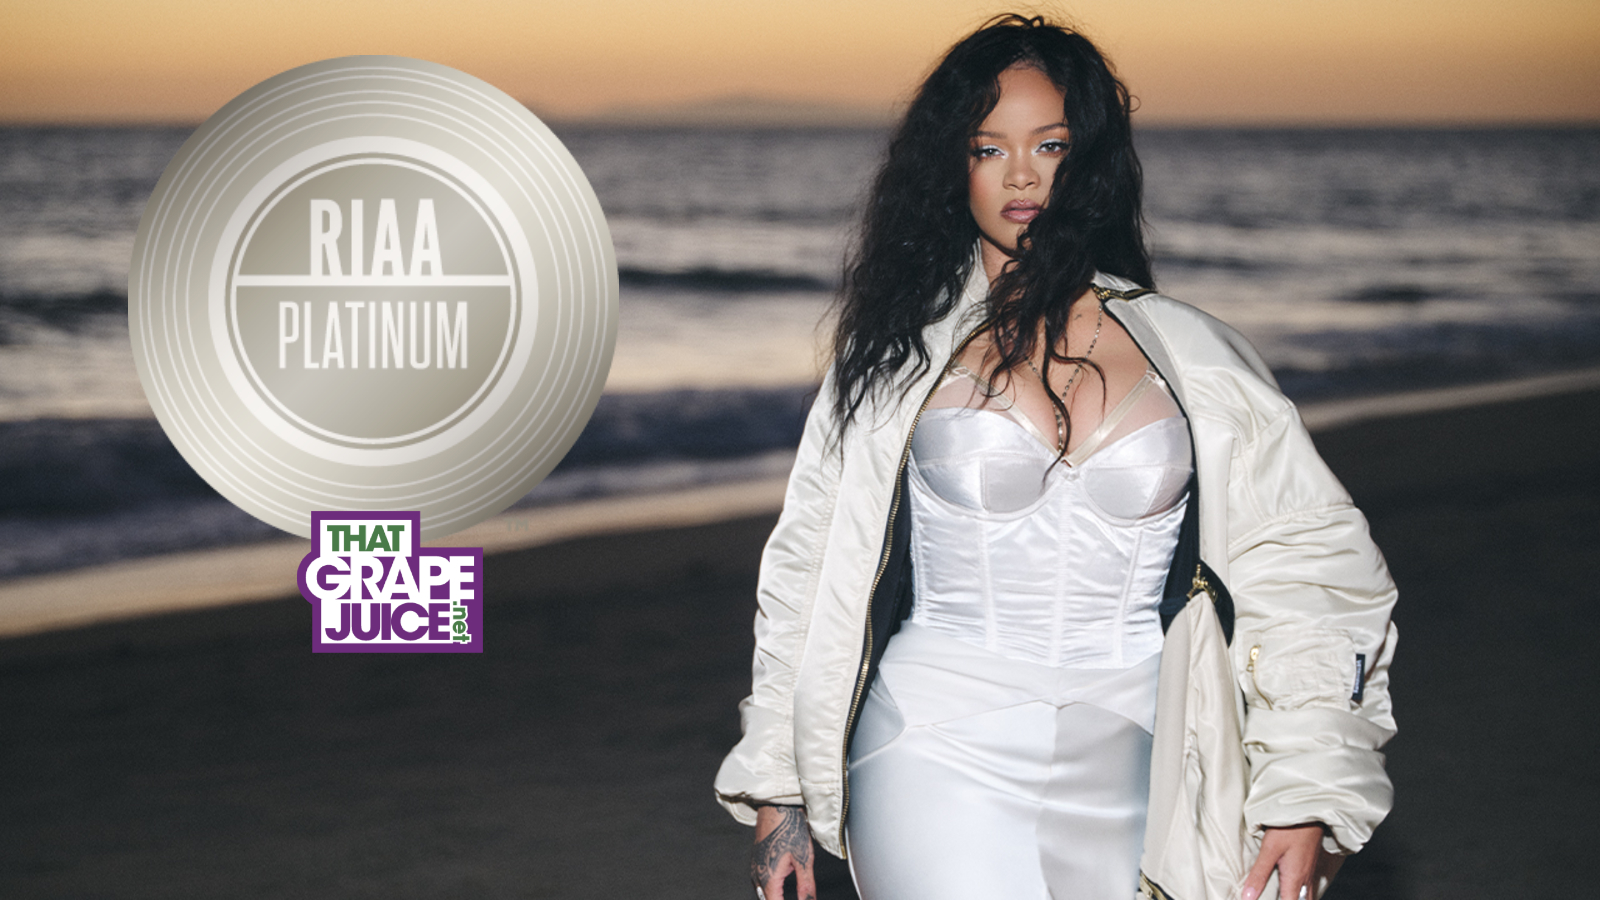 RIAA: Rihanna’s ‘Lift Me Up’ Becomes Her Record-Extending 43rd Platinum Hit